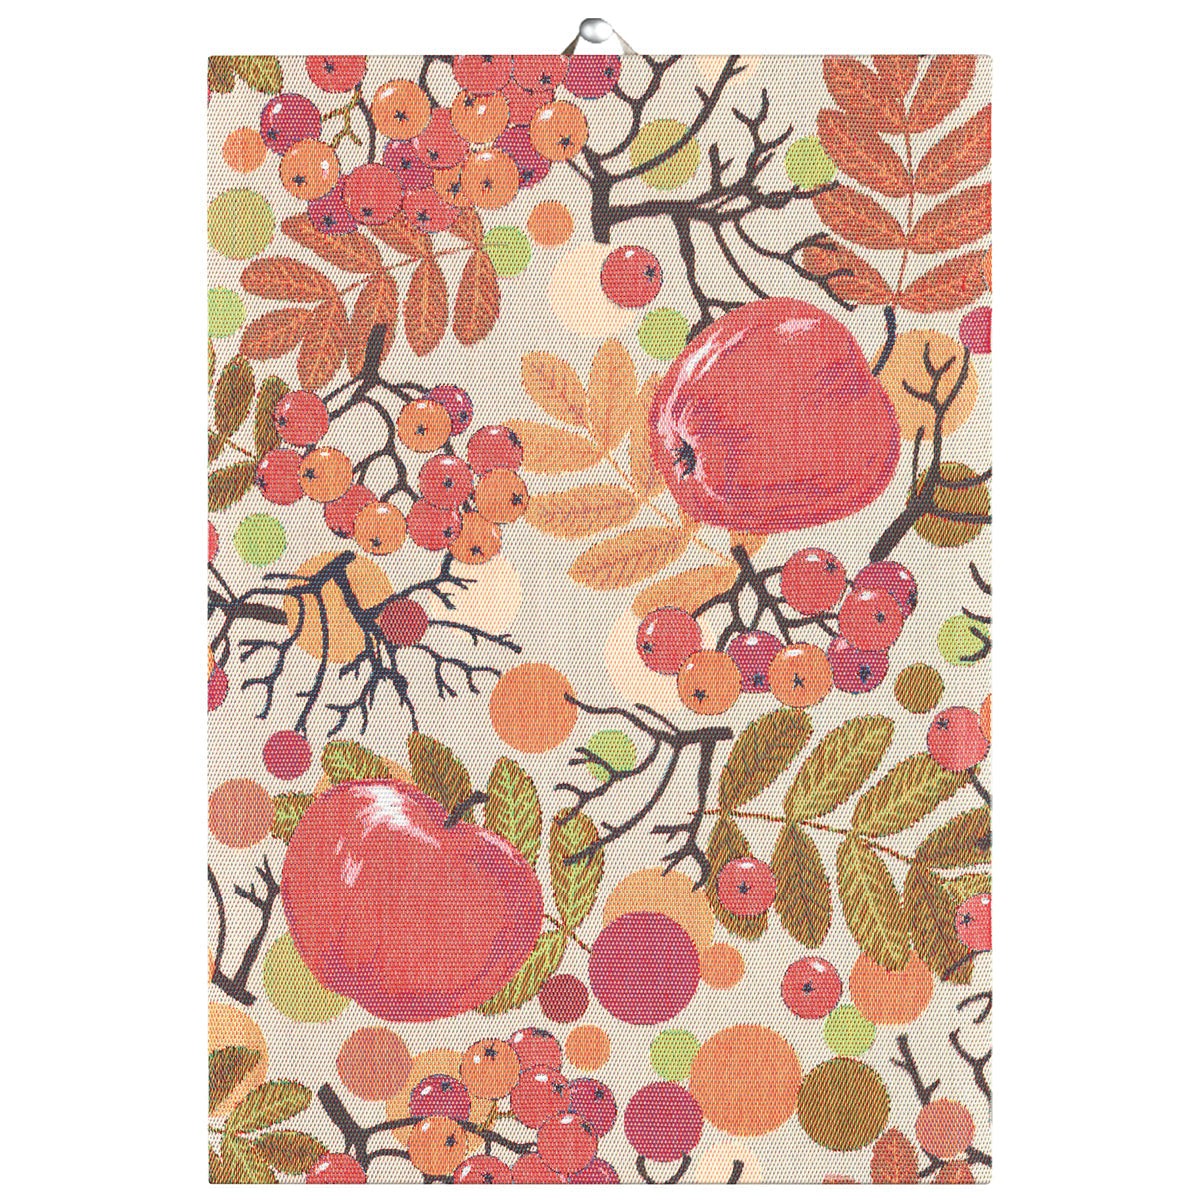 Tea Towel with Apples and Leaves at Harvest